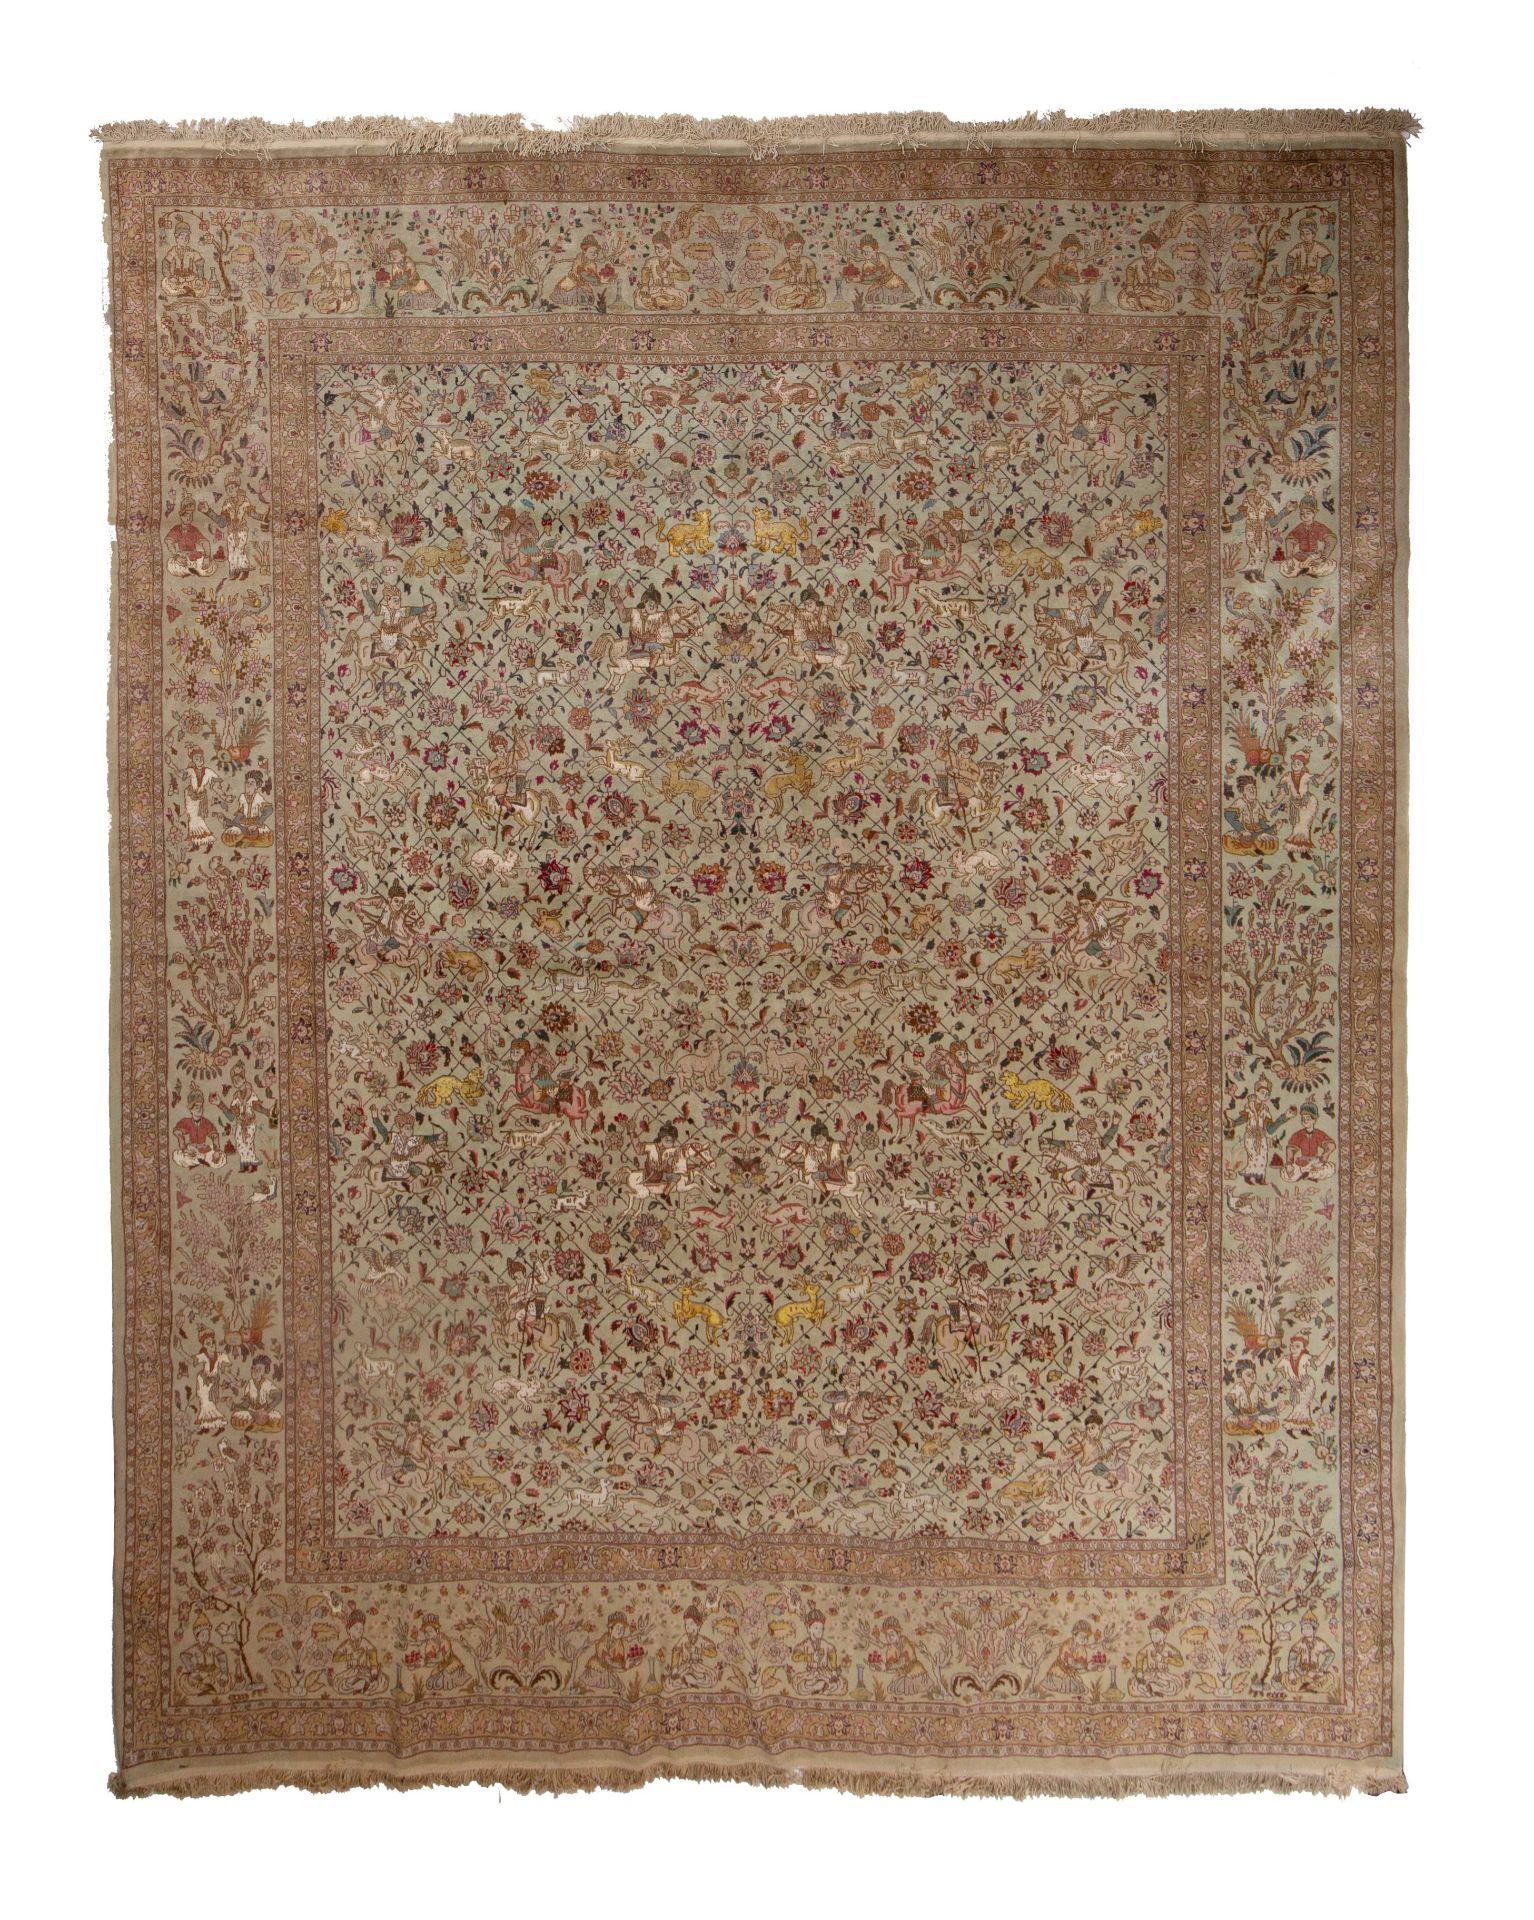 A large Oriental carpet decorated with hunting scenes to the field, 303 x 385 cm